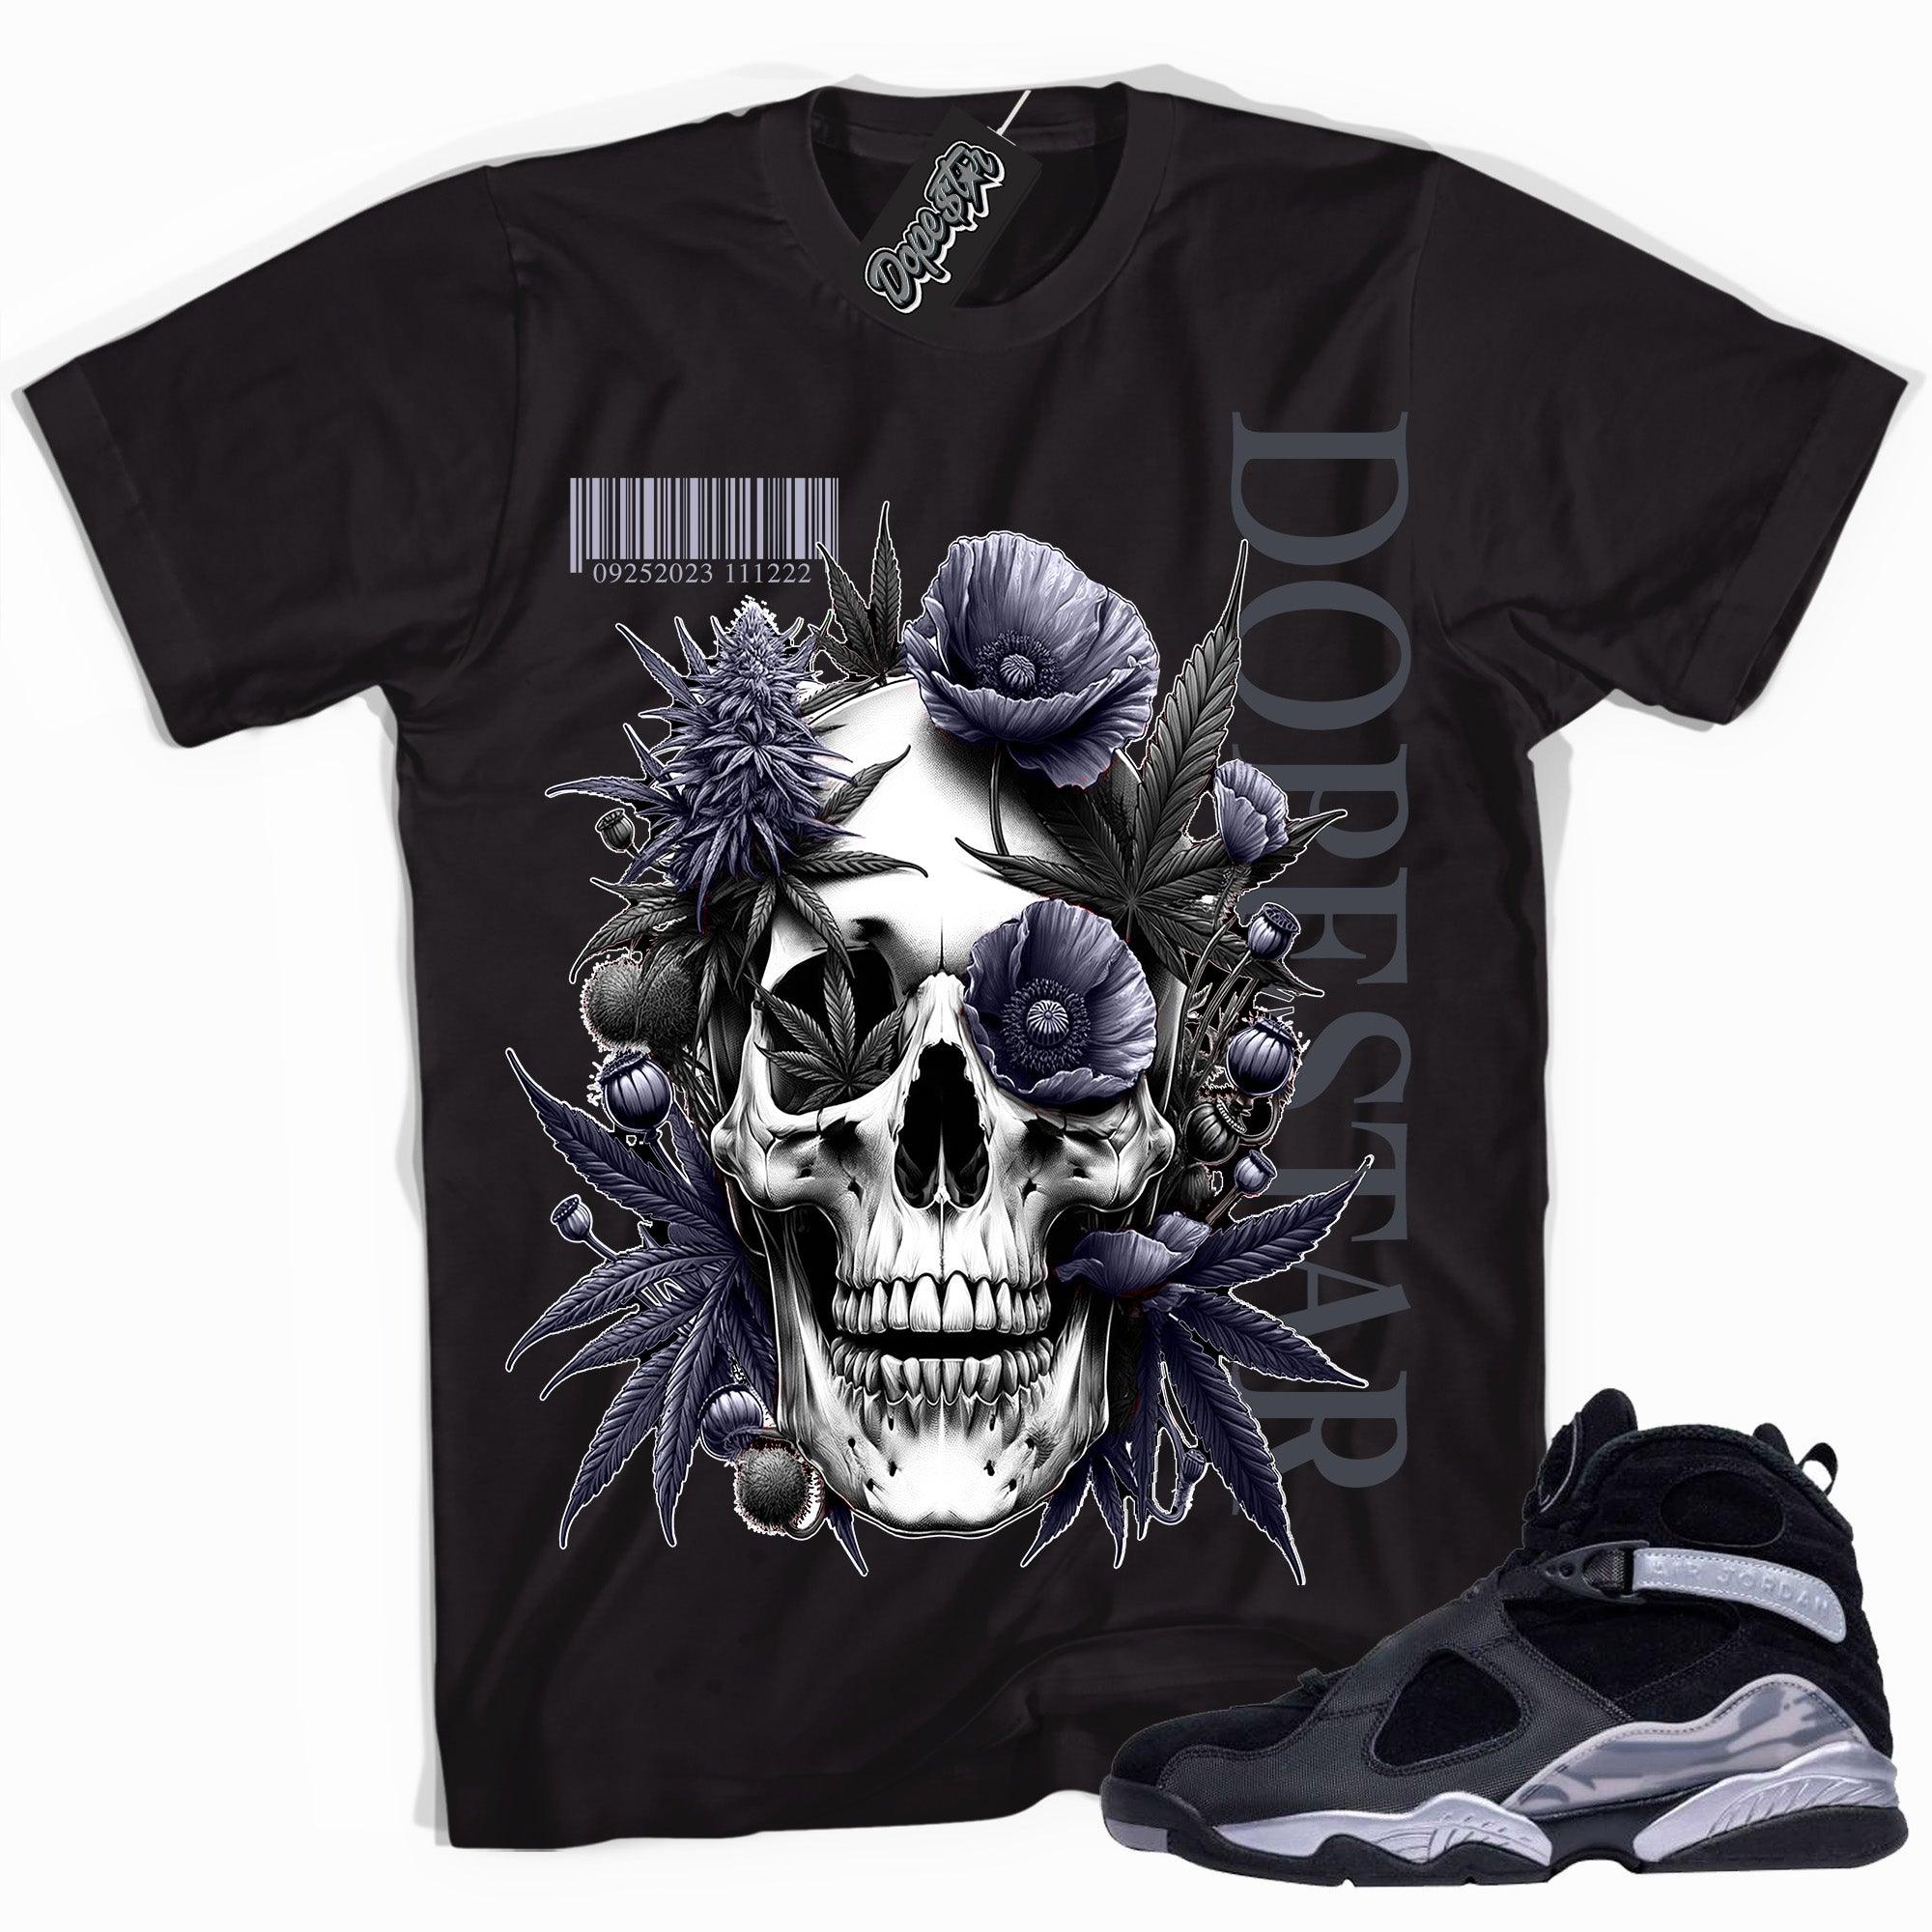 Cool Black graphic tee with “ Skull Cannabis Poppies ” print, that perfectly matches Air Jordan 8 Winterized  sneakers 